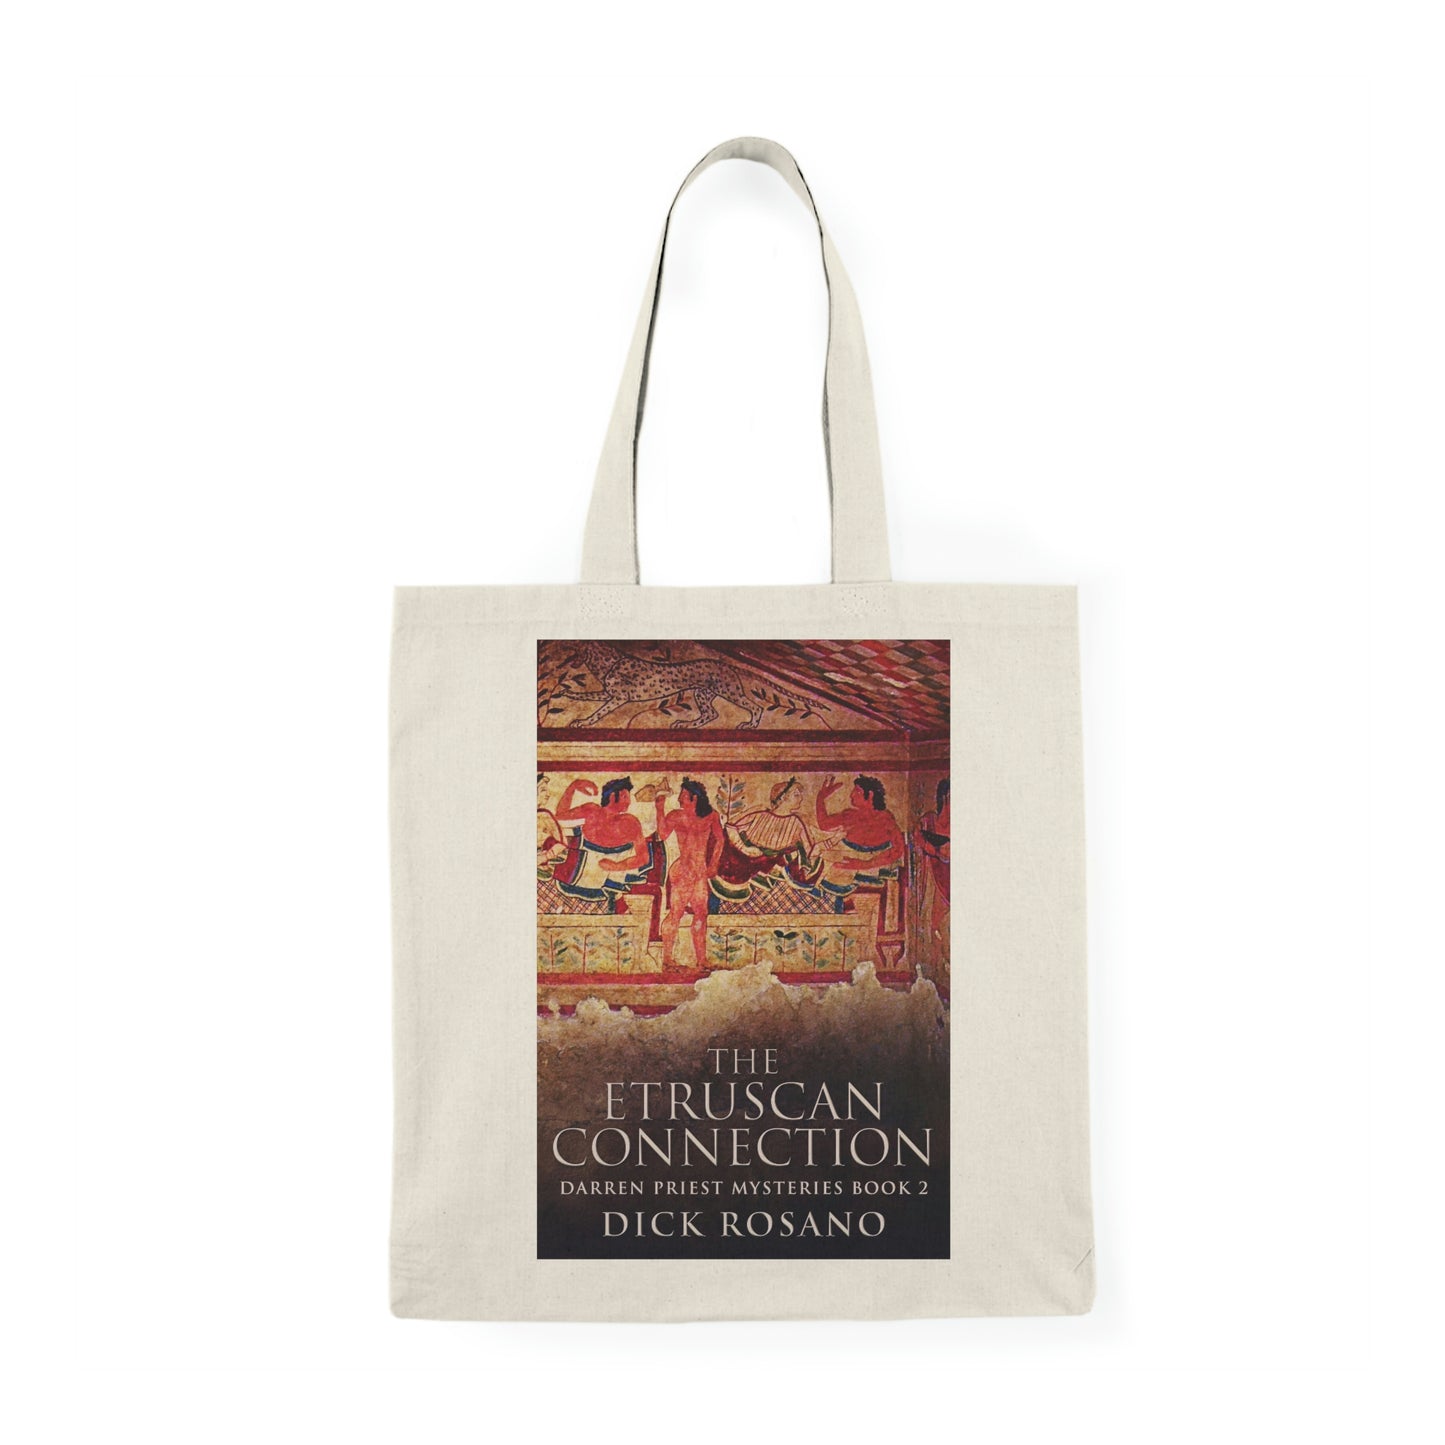 The Etruscan Connection - Natural Tote Bag